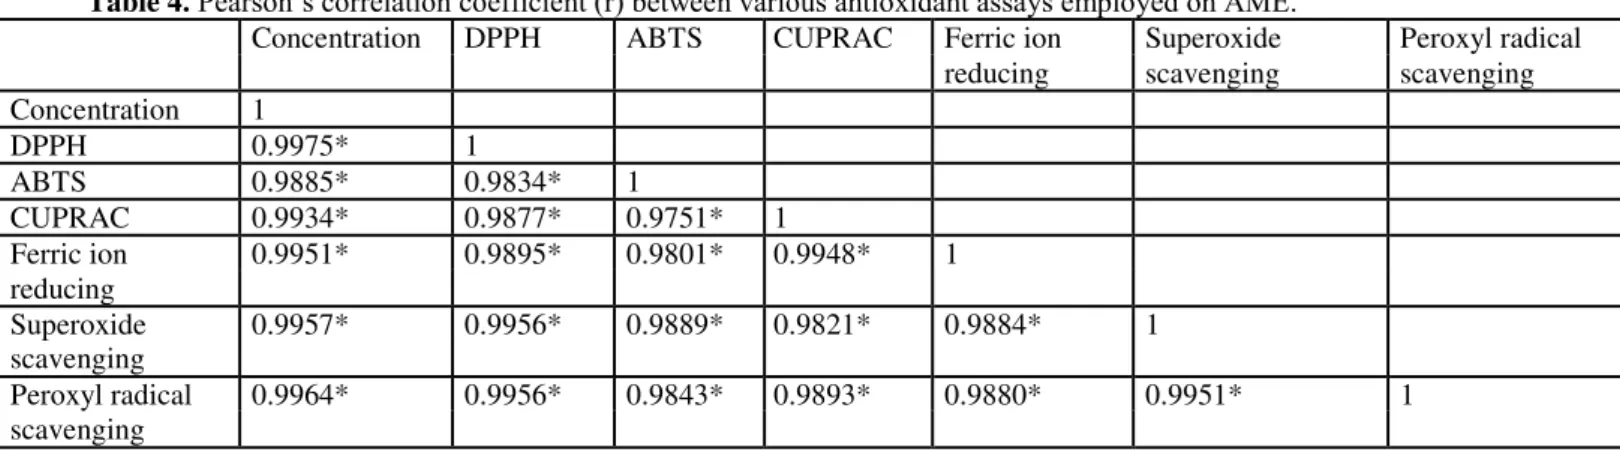 Table 4.  Pearson’s correlation coefficient (r) between various antioxidant assays employed on AME